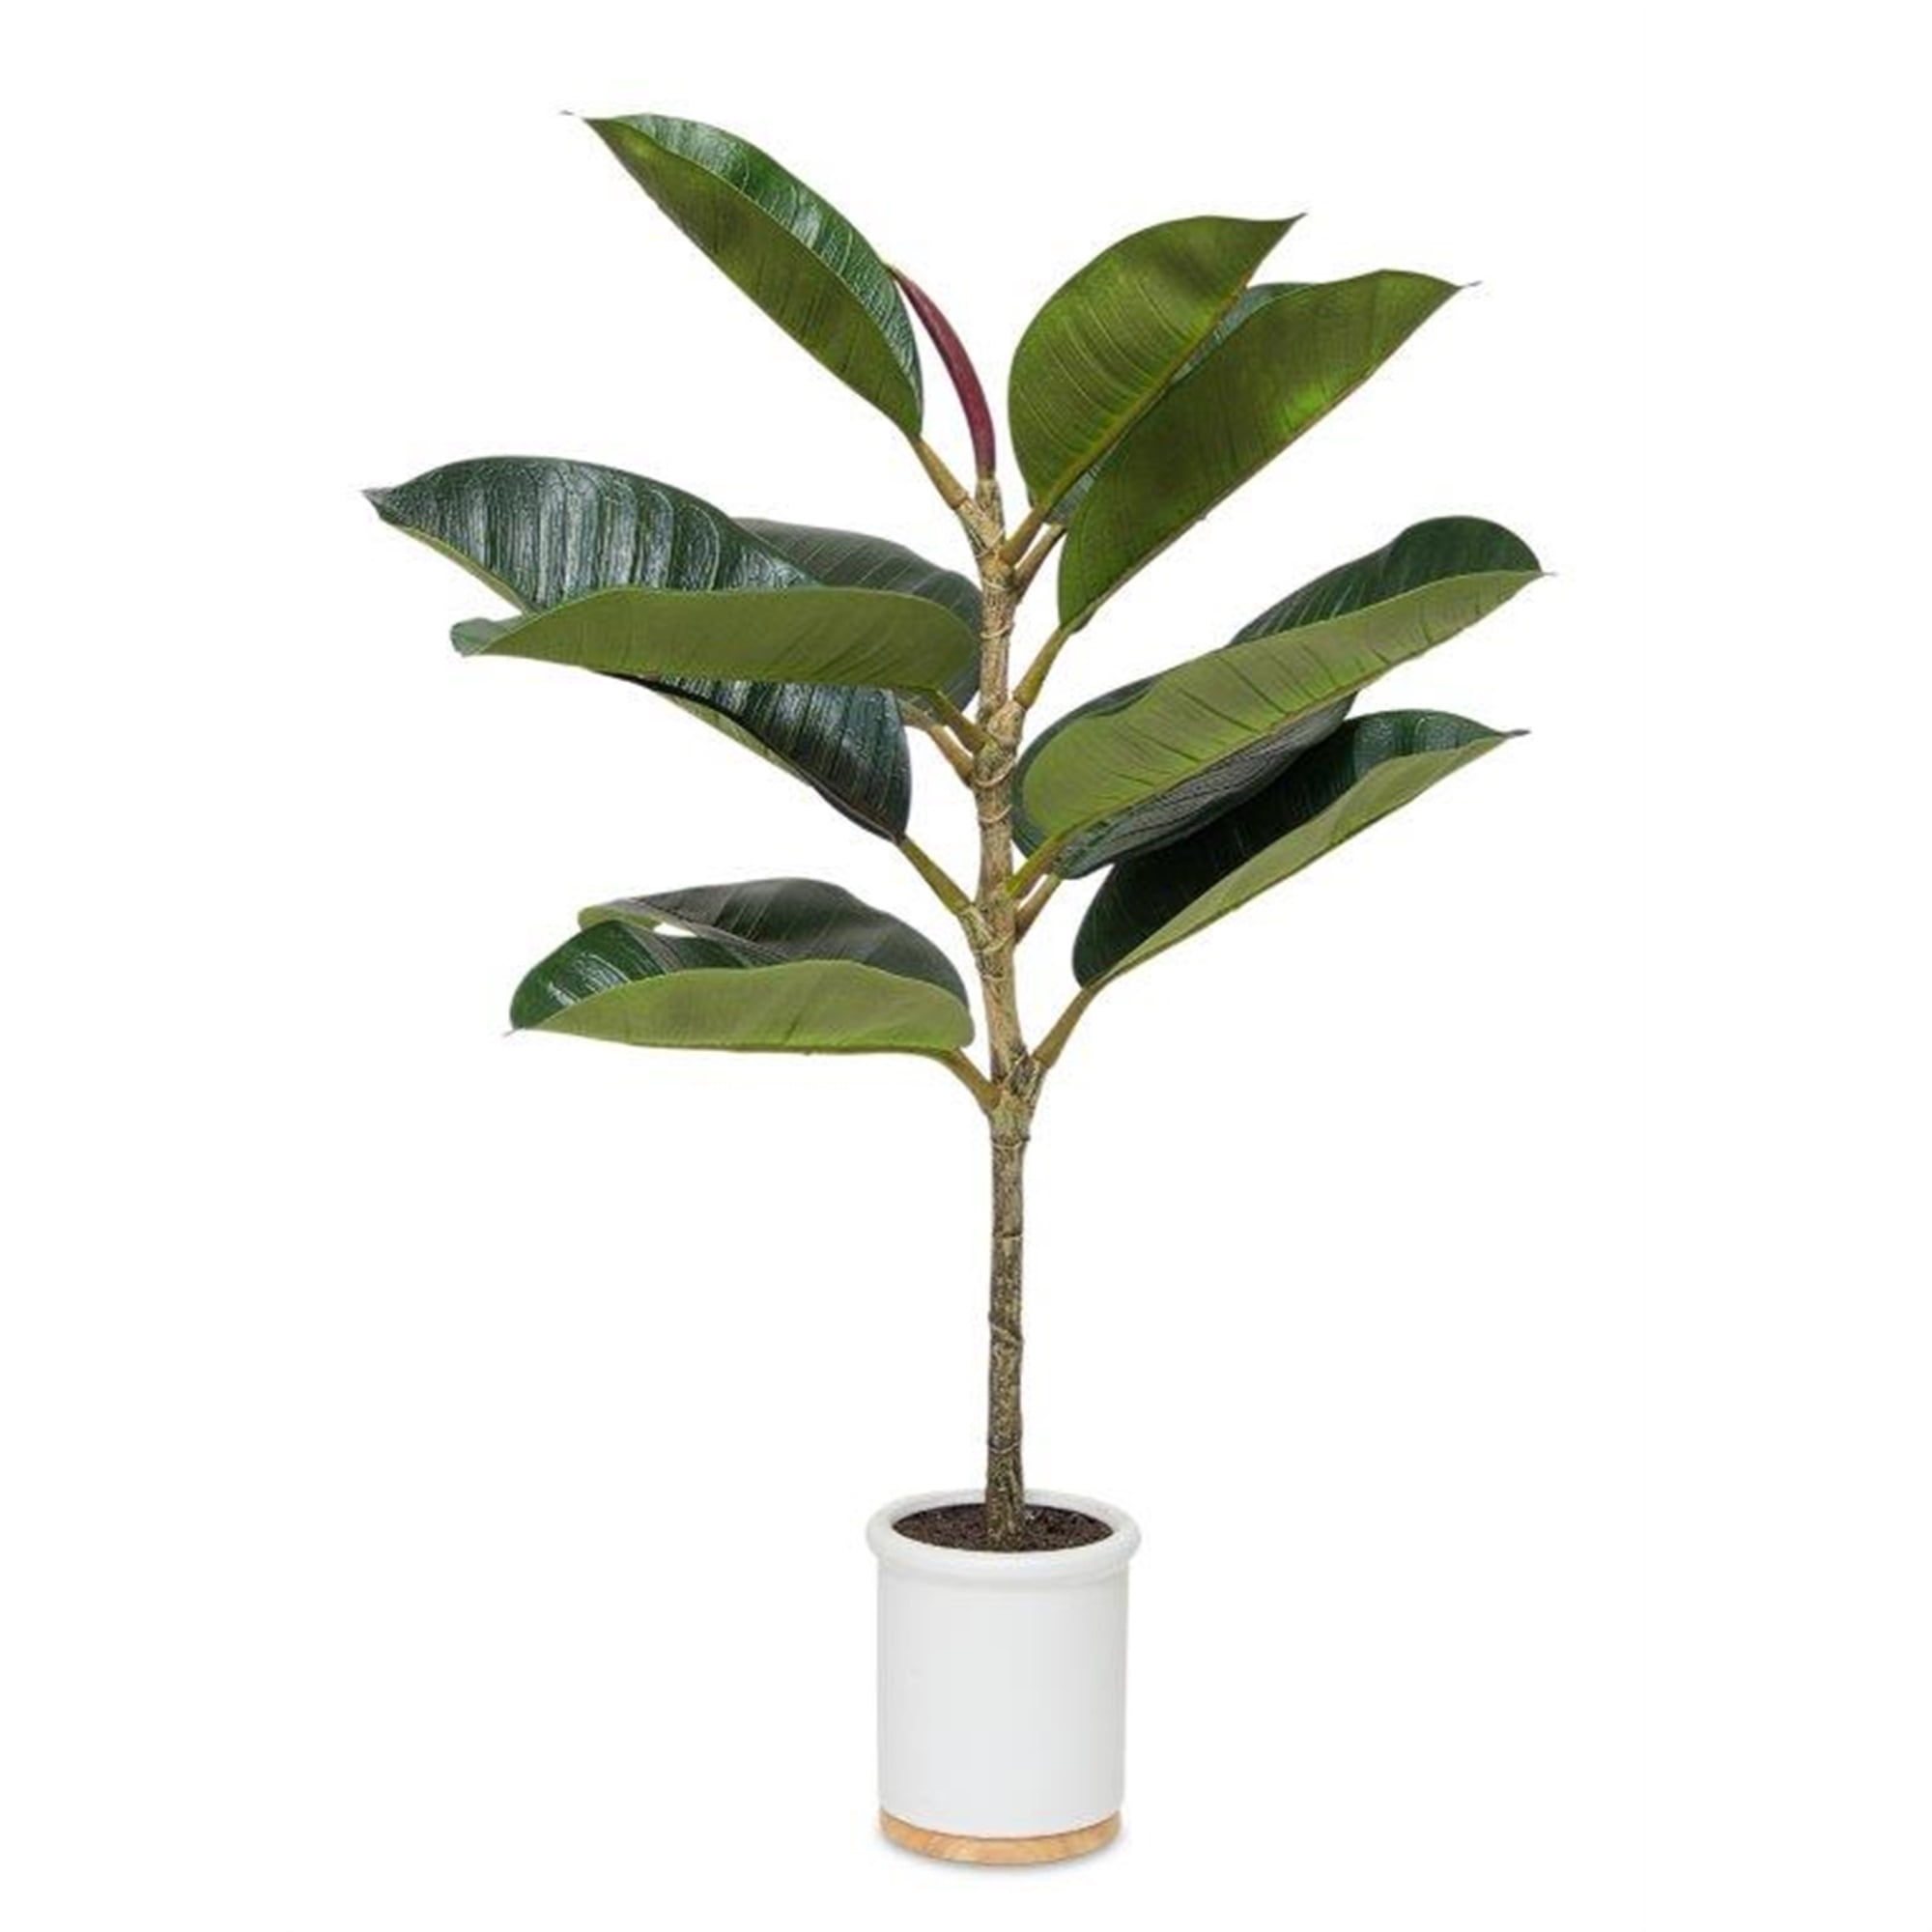 Potted Rubber Plant 30"H Polyester/Ceramic